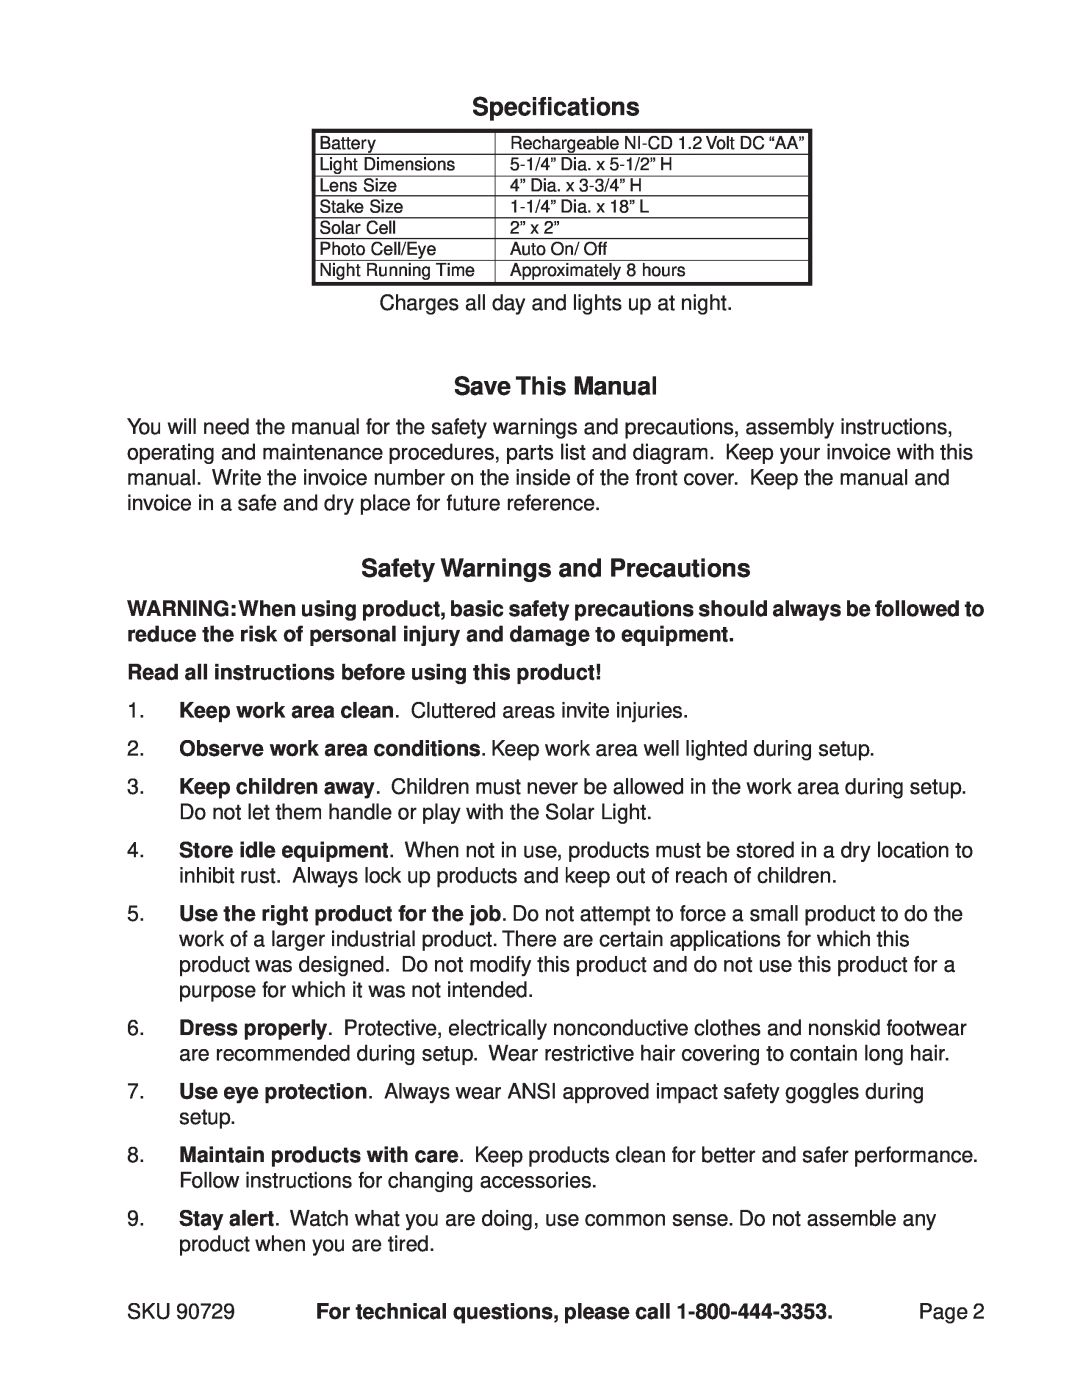 Harbor Freight Tools 90729 manual Specifications, Save This Manual, Safety Warnings and Precautions 